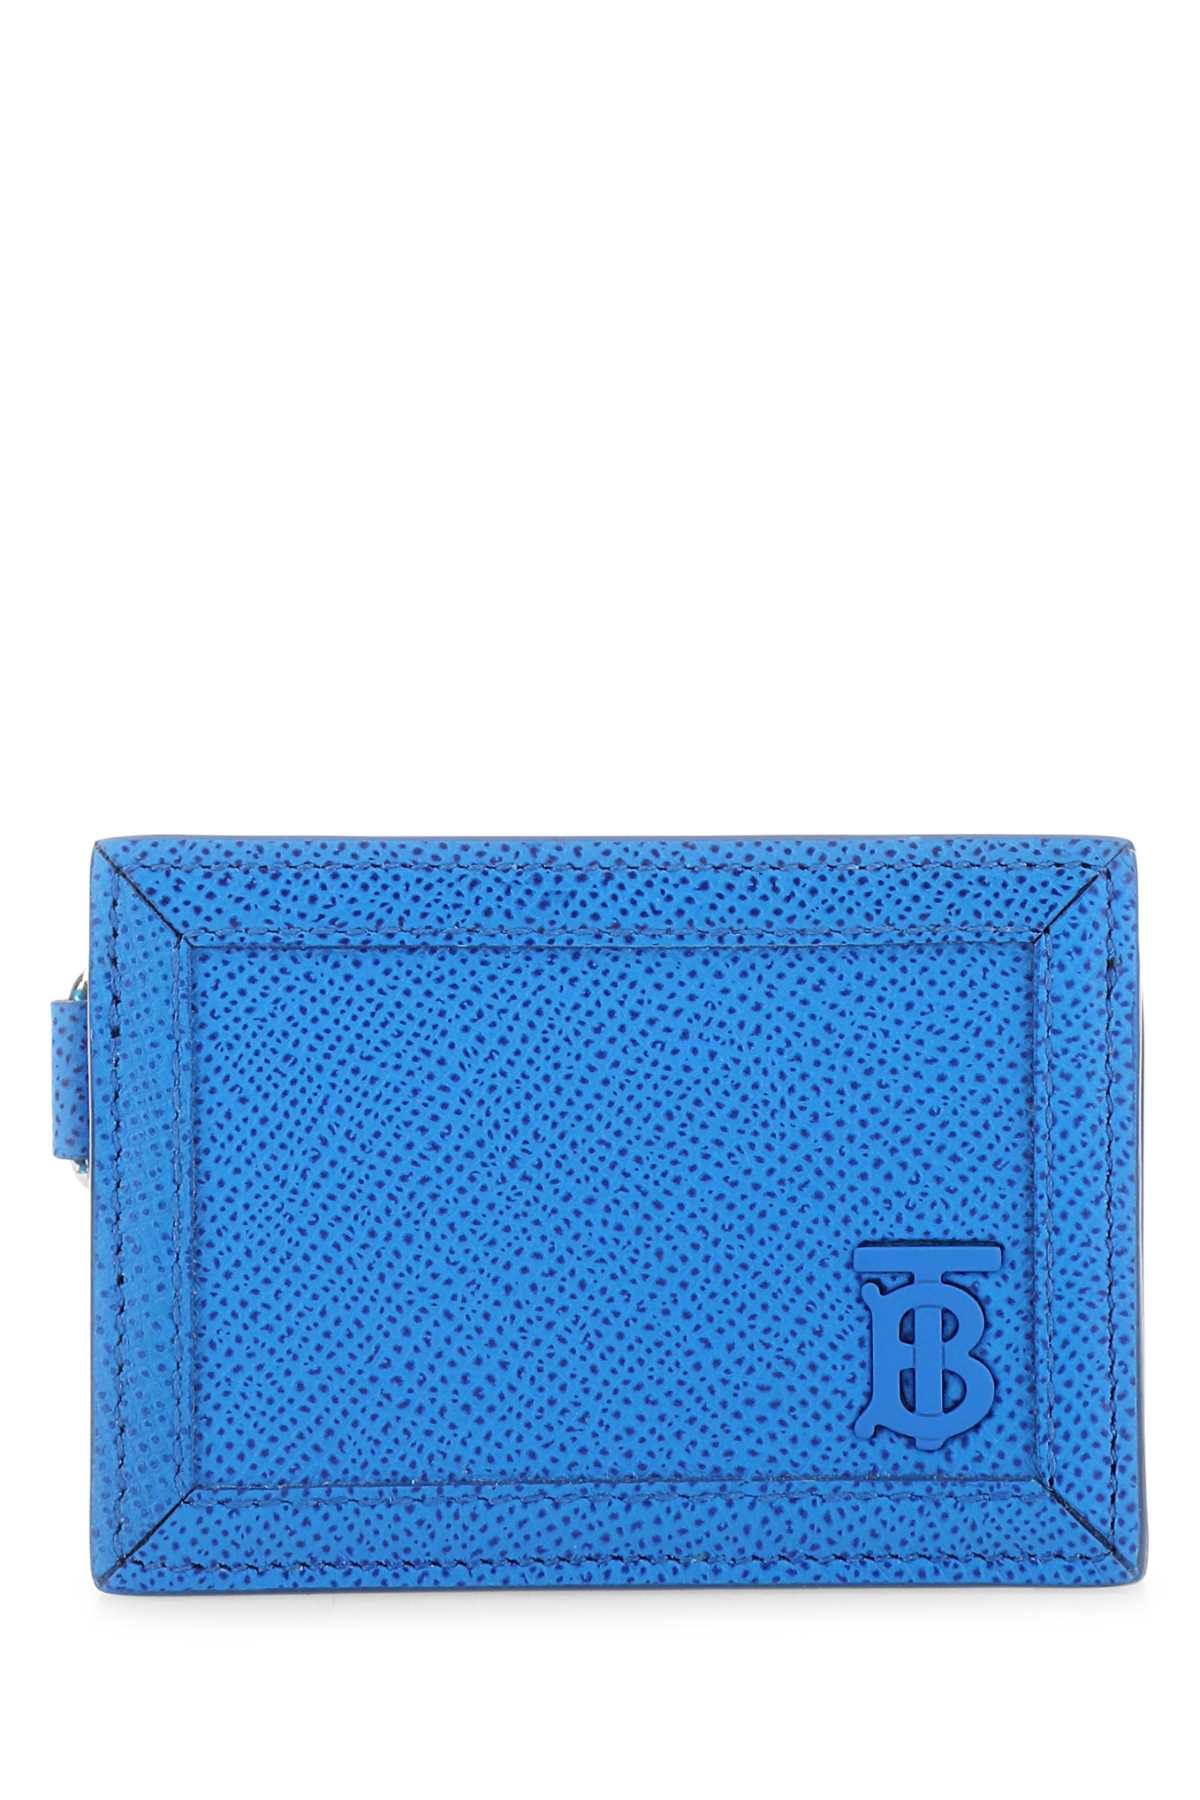 Burberry Turquoise Leather Card Holder